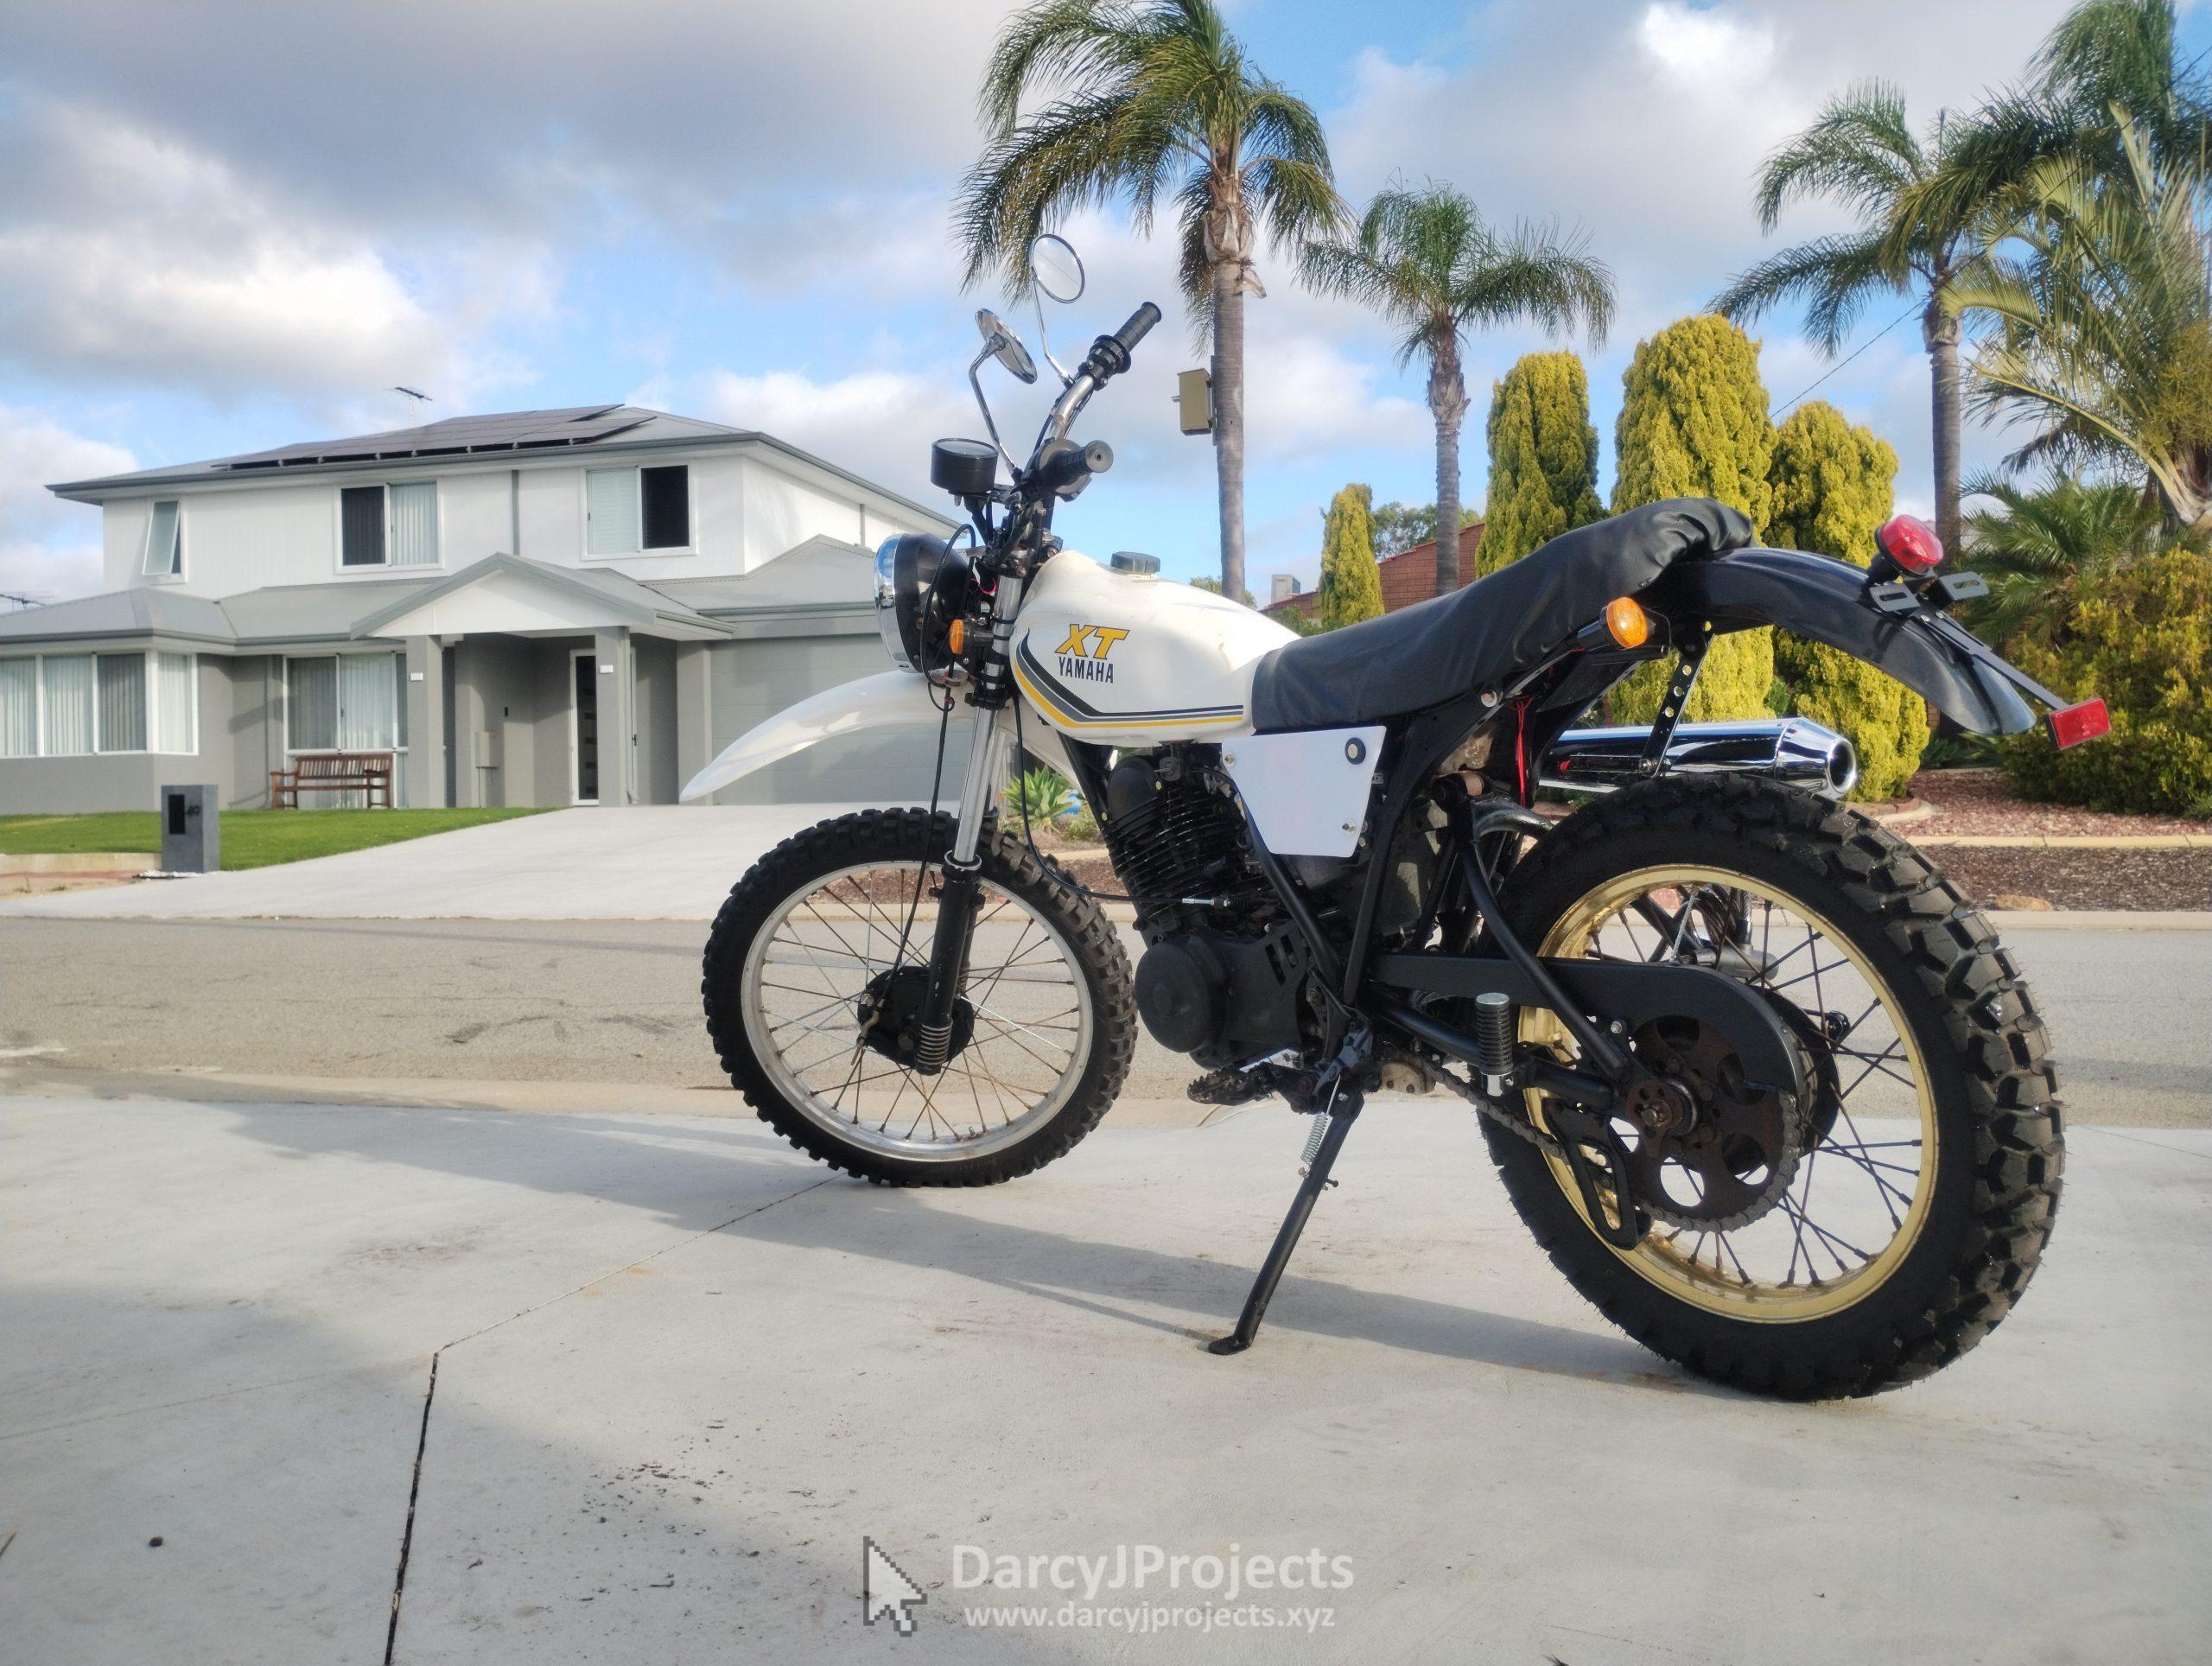 Protected: The Yamaha XT250 – My First True Motorcycle